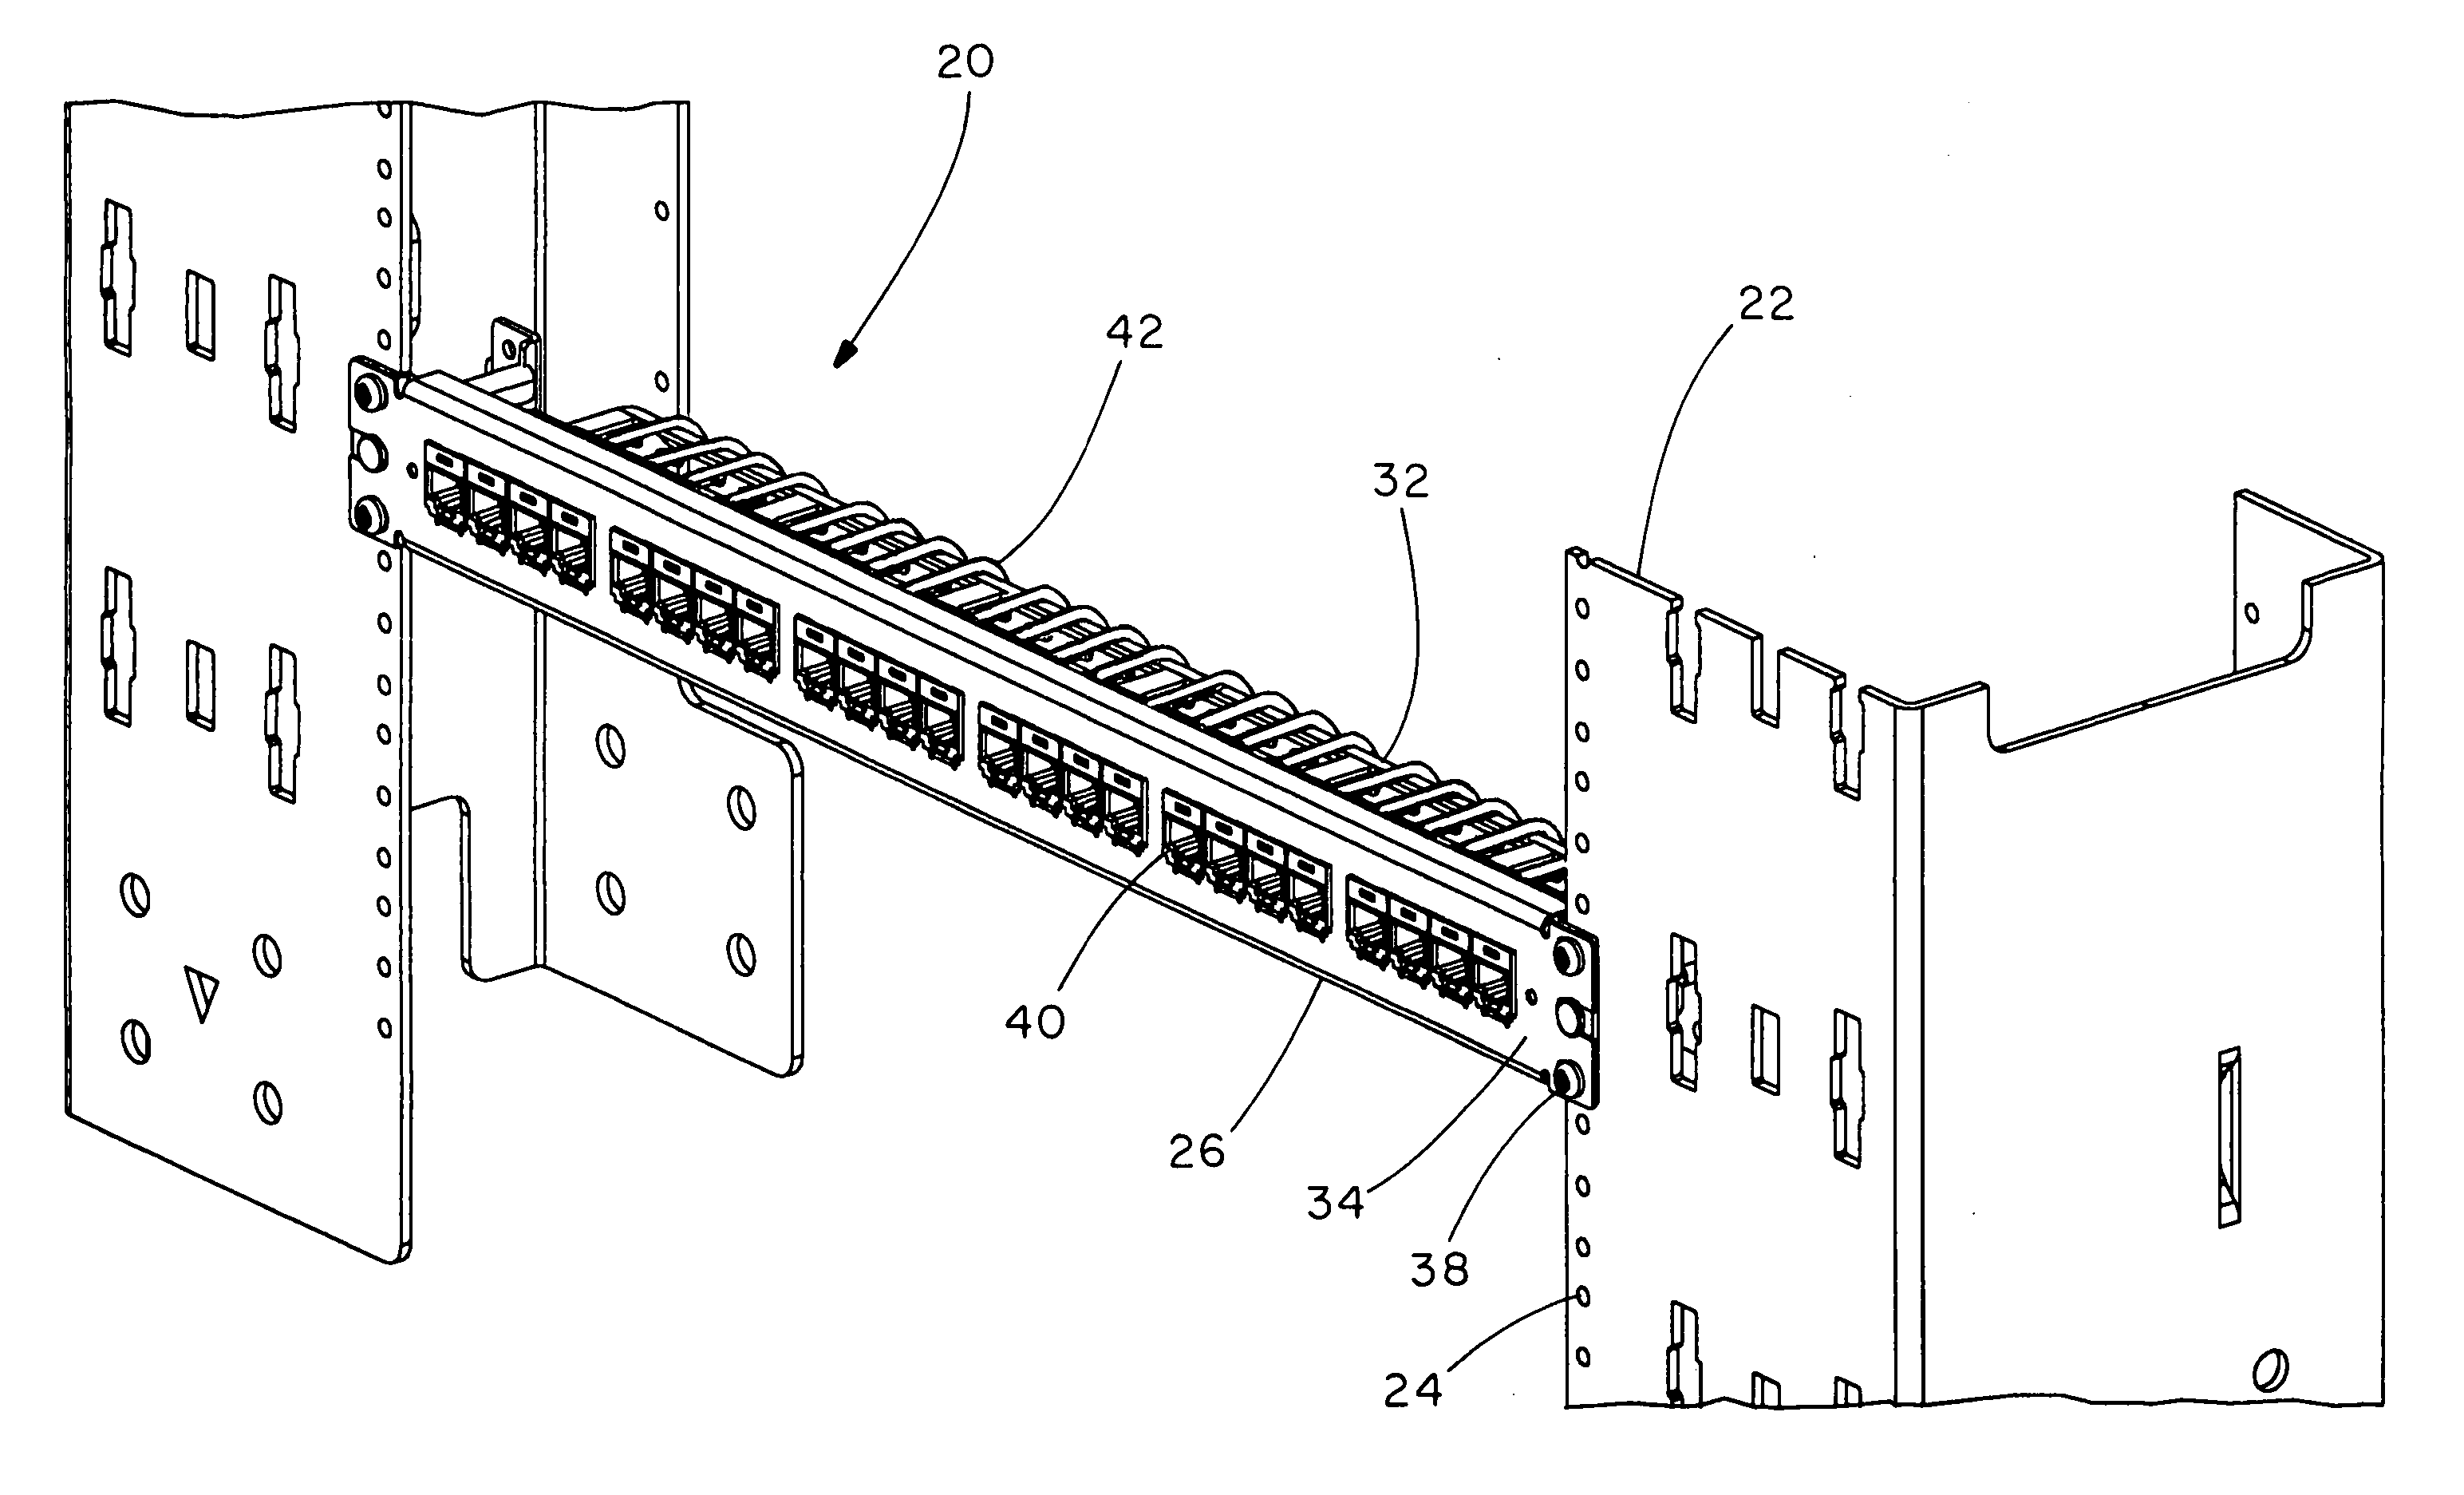 Patch panel and strain relief bar assembly